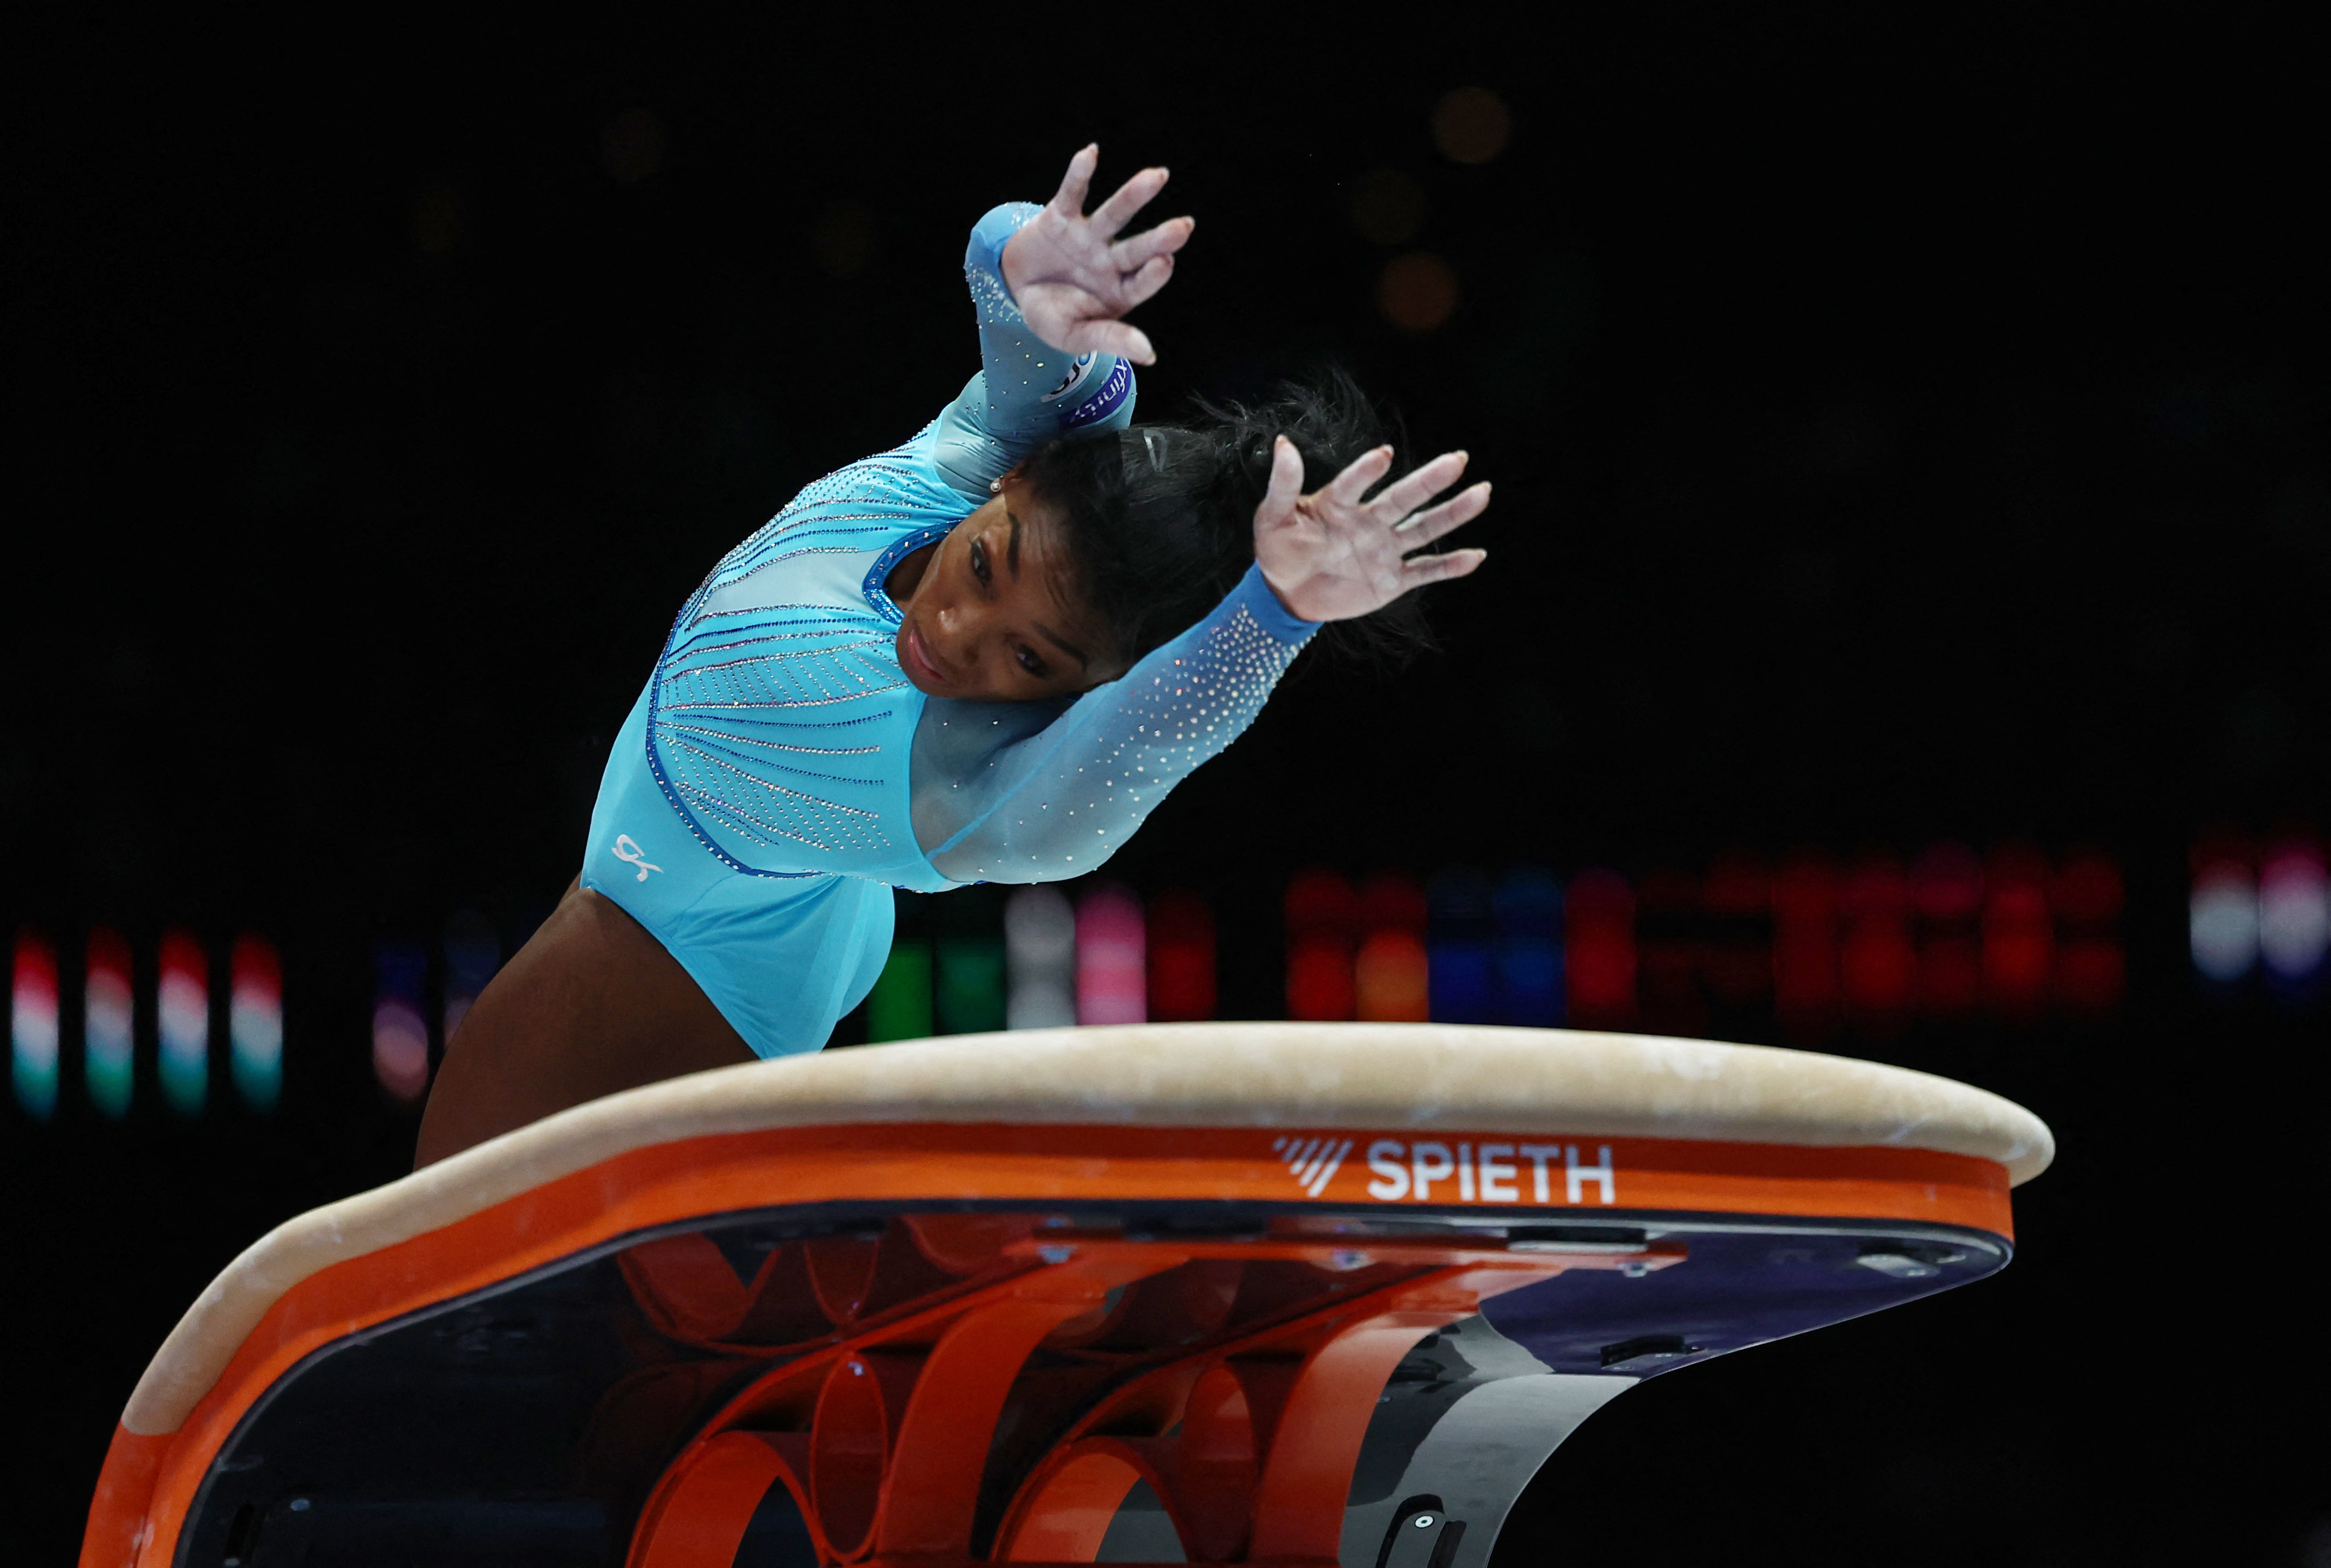 Simone Biles Pulled Off a Gymnastics Move That's Never Been Done